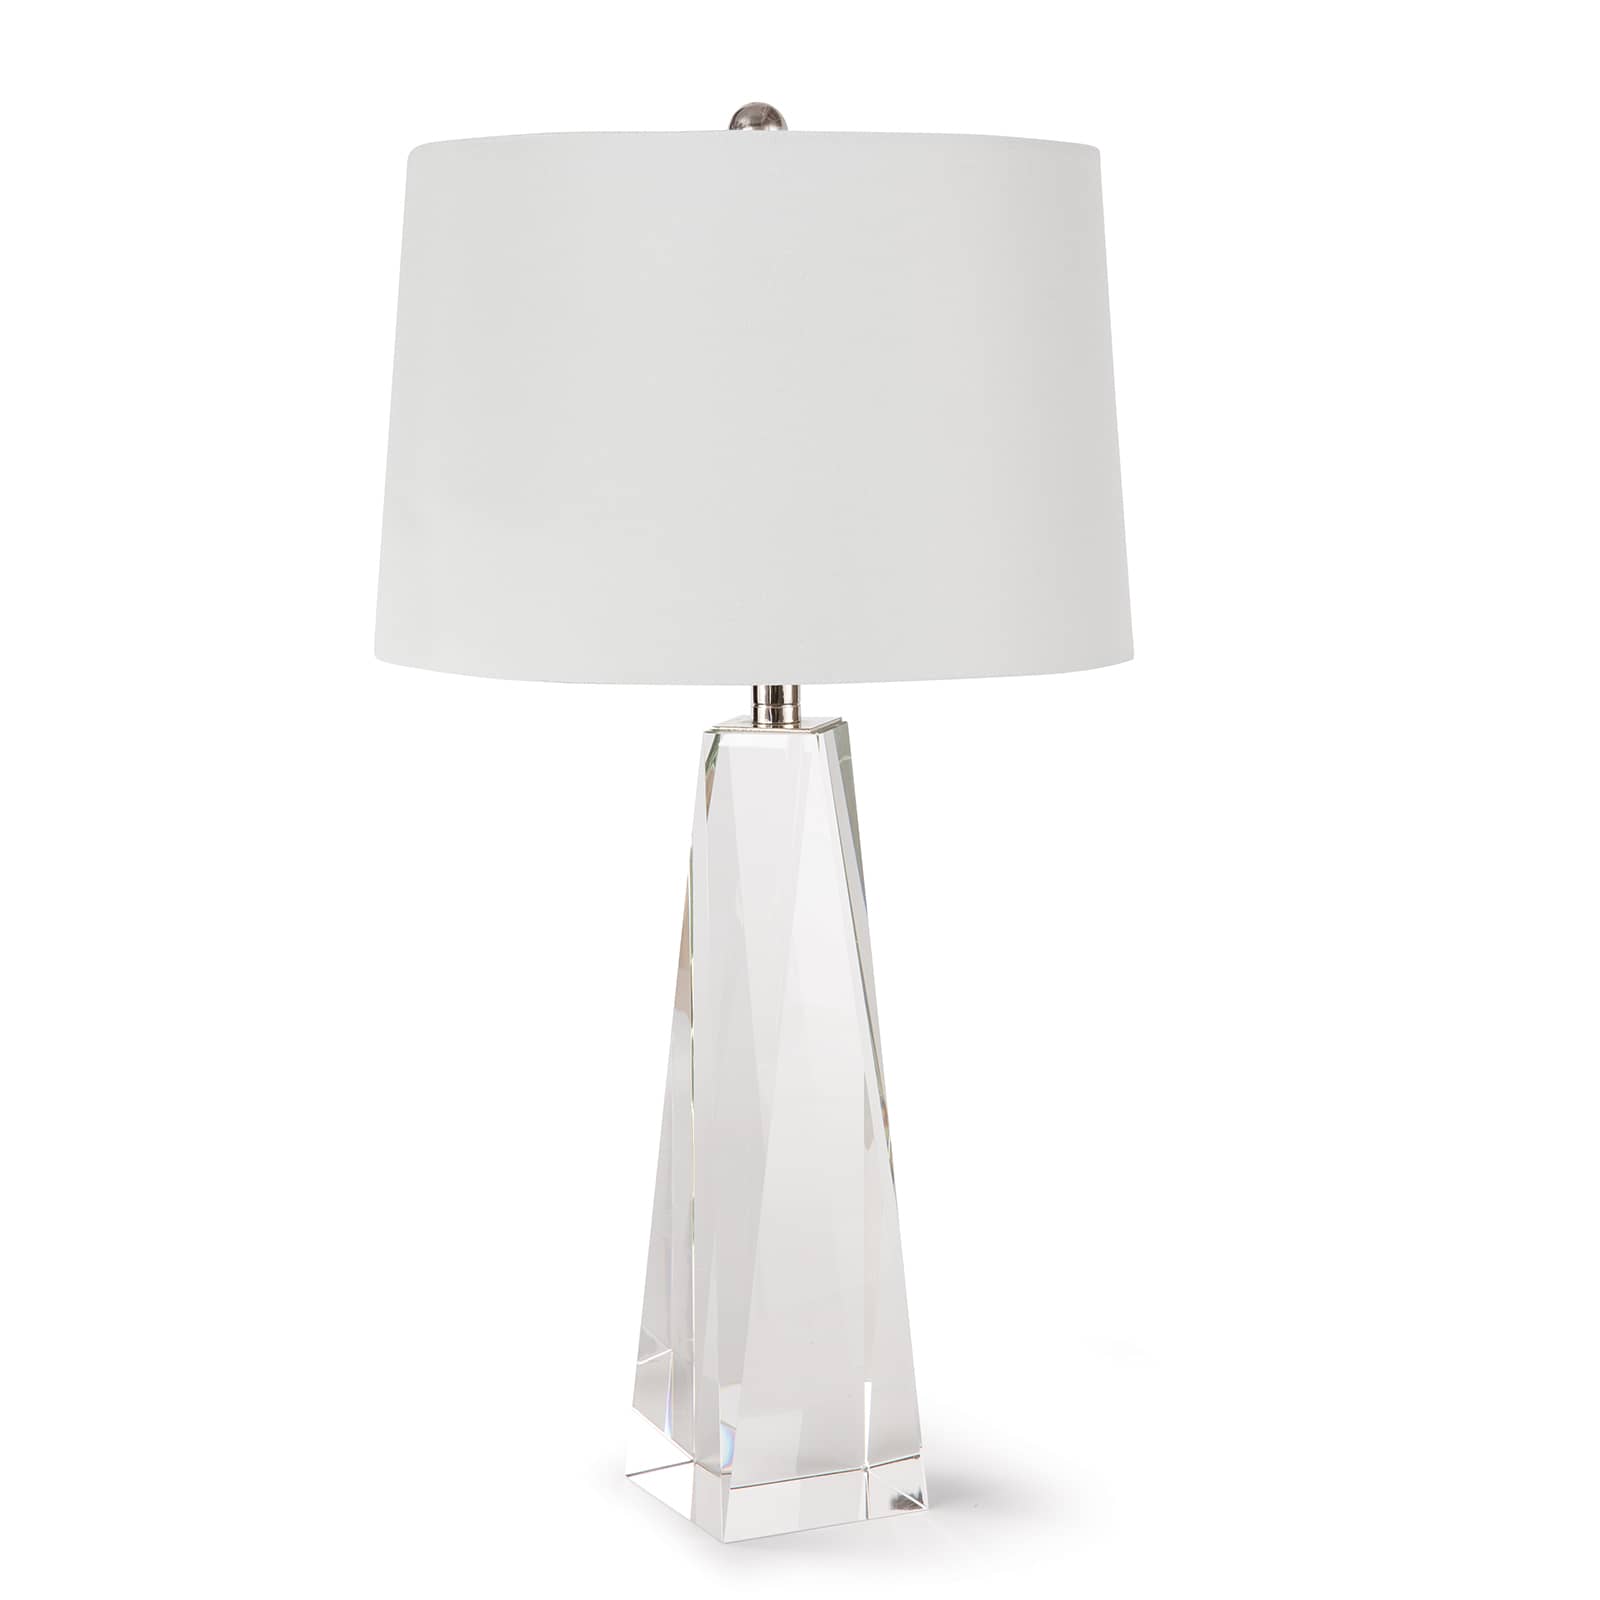 Angelica Crystal Table Lamp Small - Decor - Tipplergoods